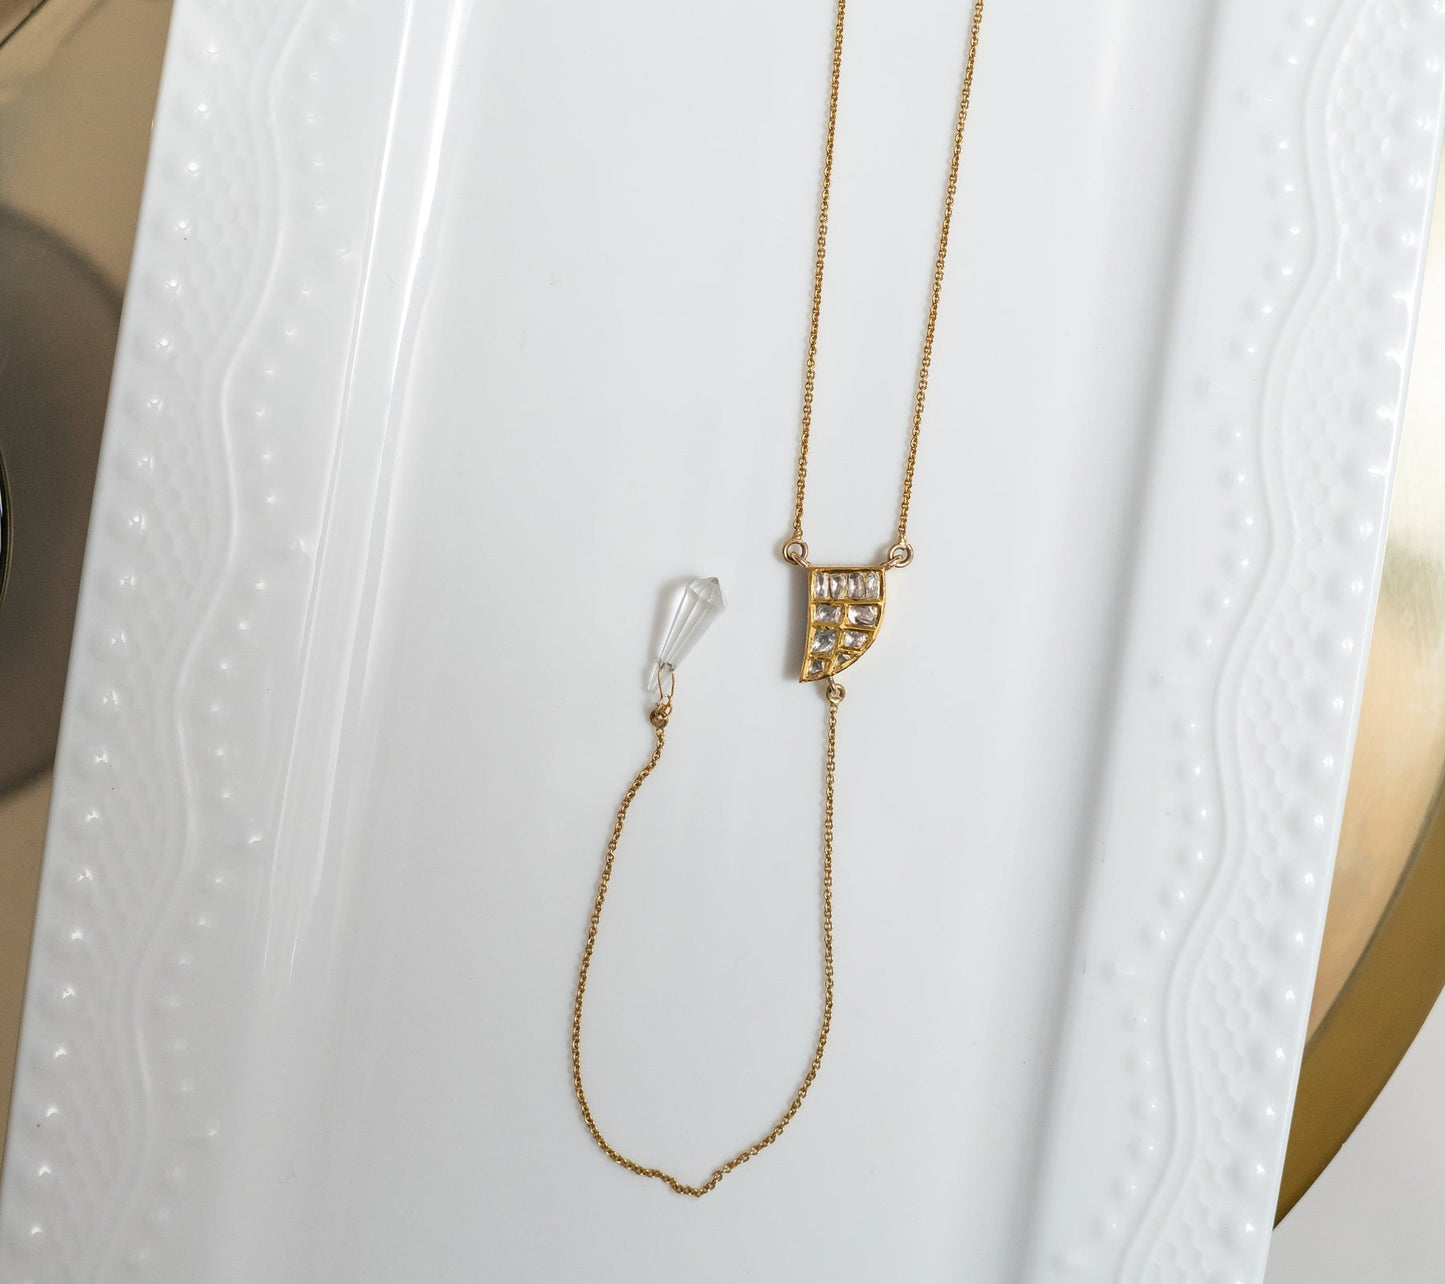 Tiger Claw dangler | Necklace